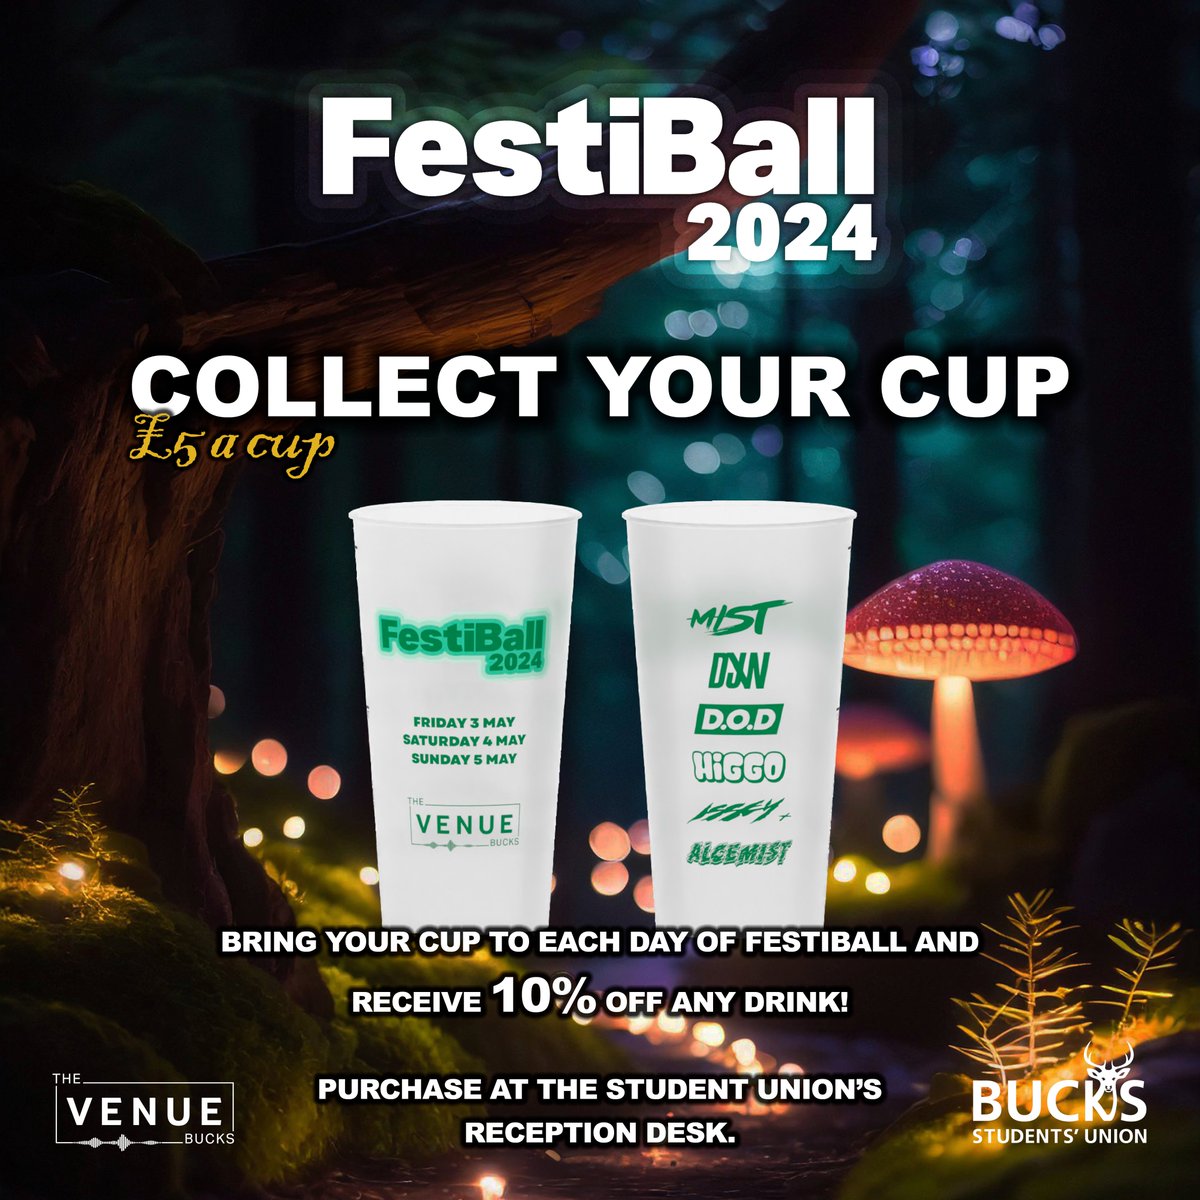 You've got your wristband, the dress codes and the full lineup, so all you need now is your Festiball cup! If you bring your cup to each day of Festiball, you get 10% off any drink! 🍹 You can purchase a cup for only £5 in The Lounge 😁